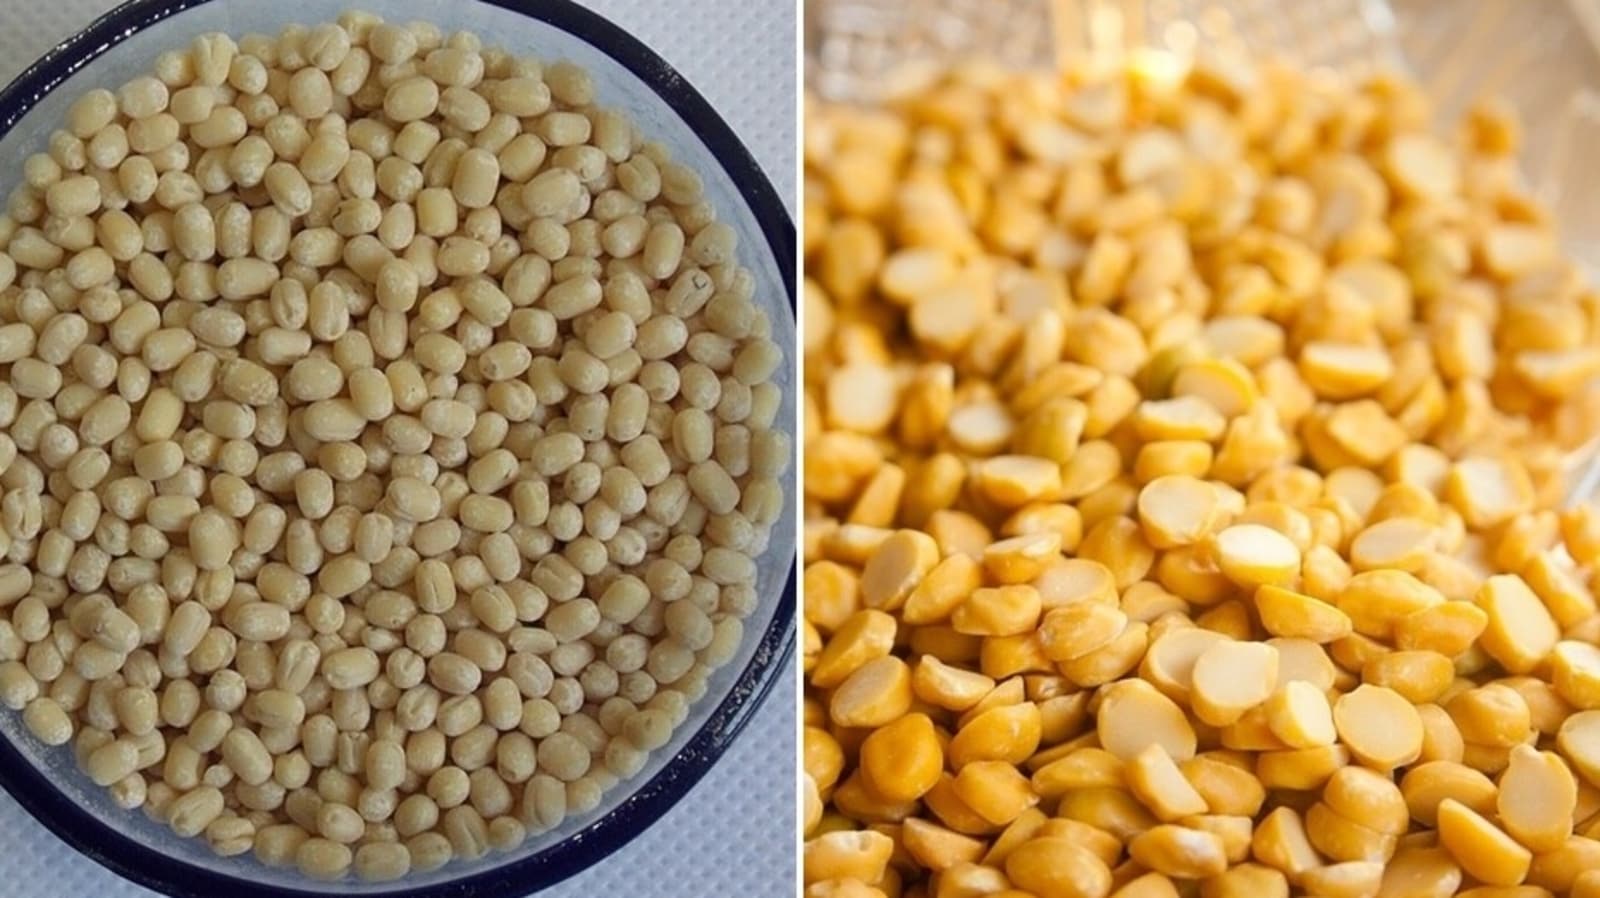 Urad dal to chana dal: 5 high-protein lentils for weight loss | Health